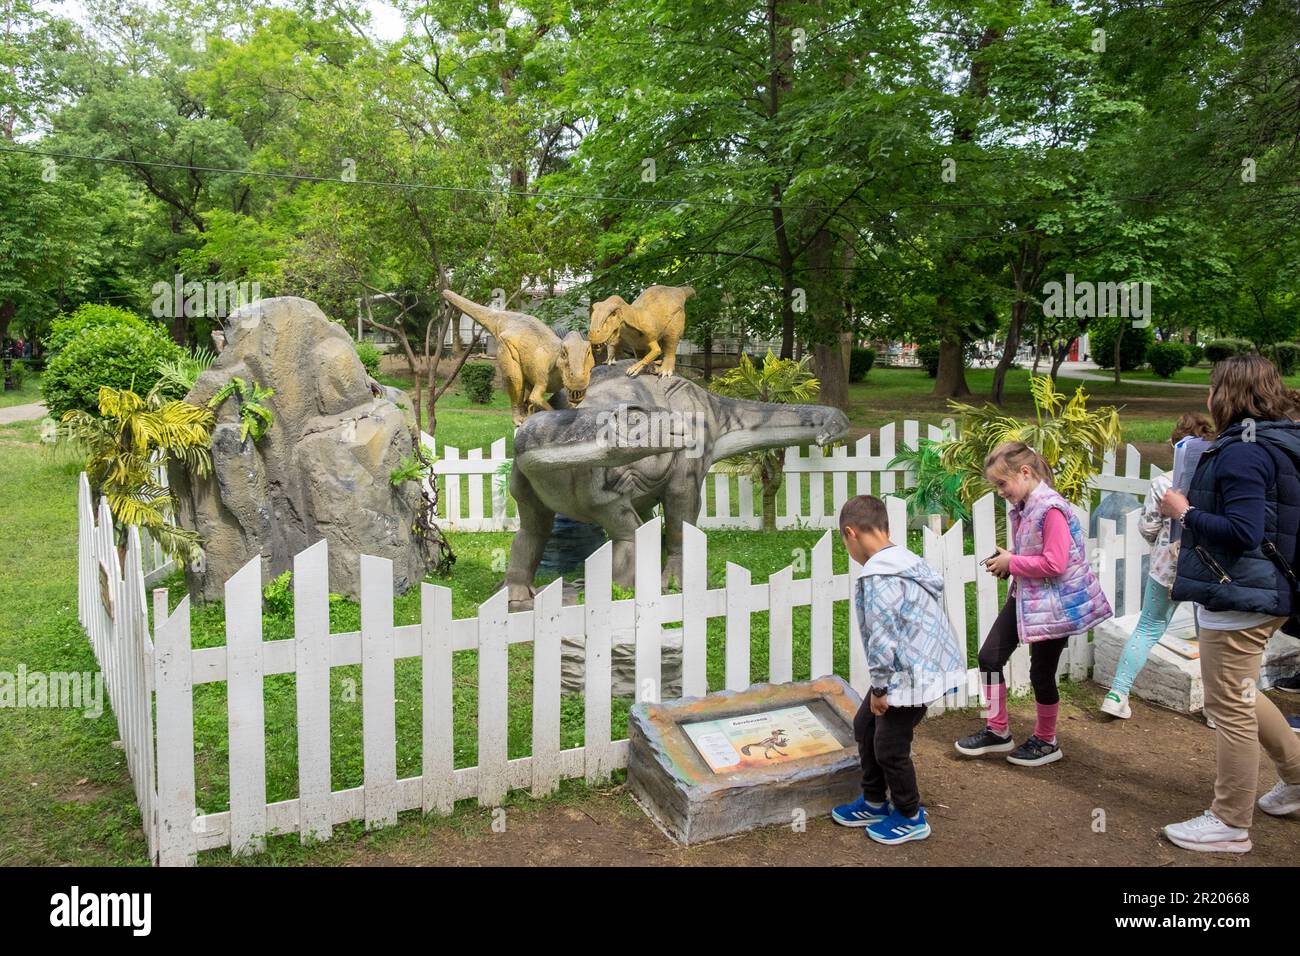 Adults and kids staring the animatronic or robotic dinosaurs in a park Stock Photo